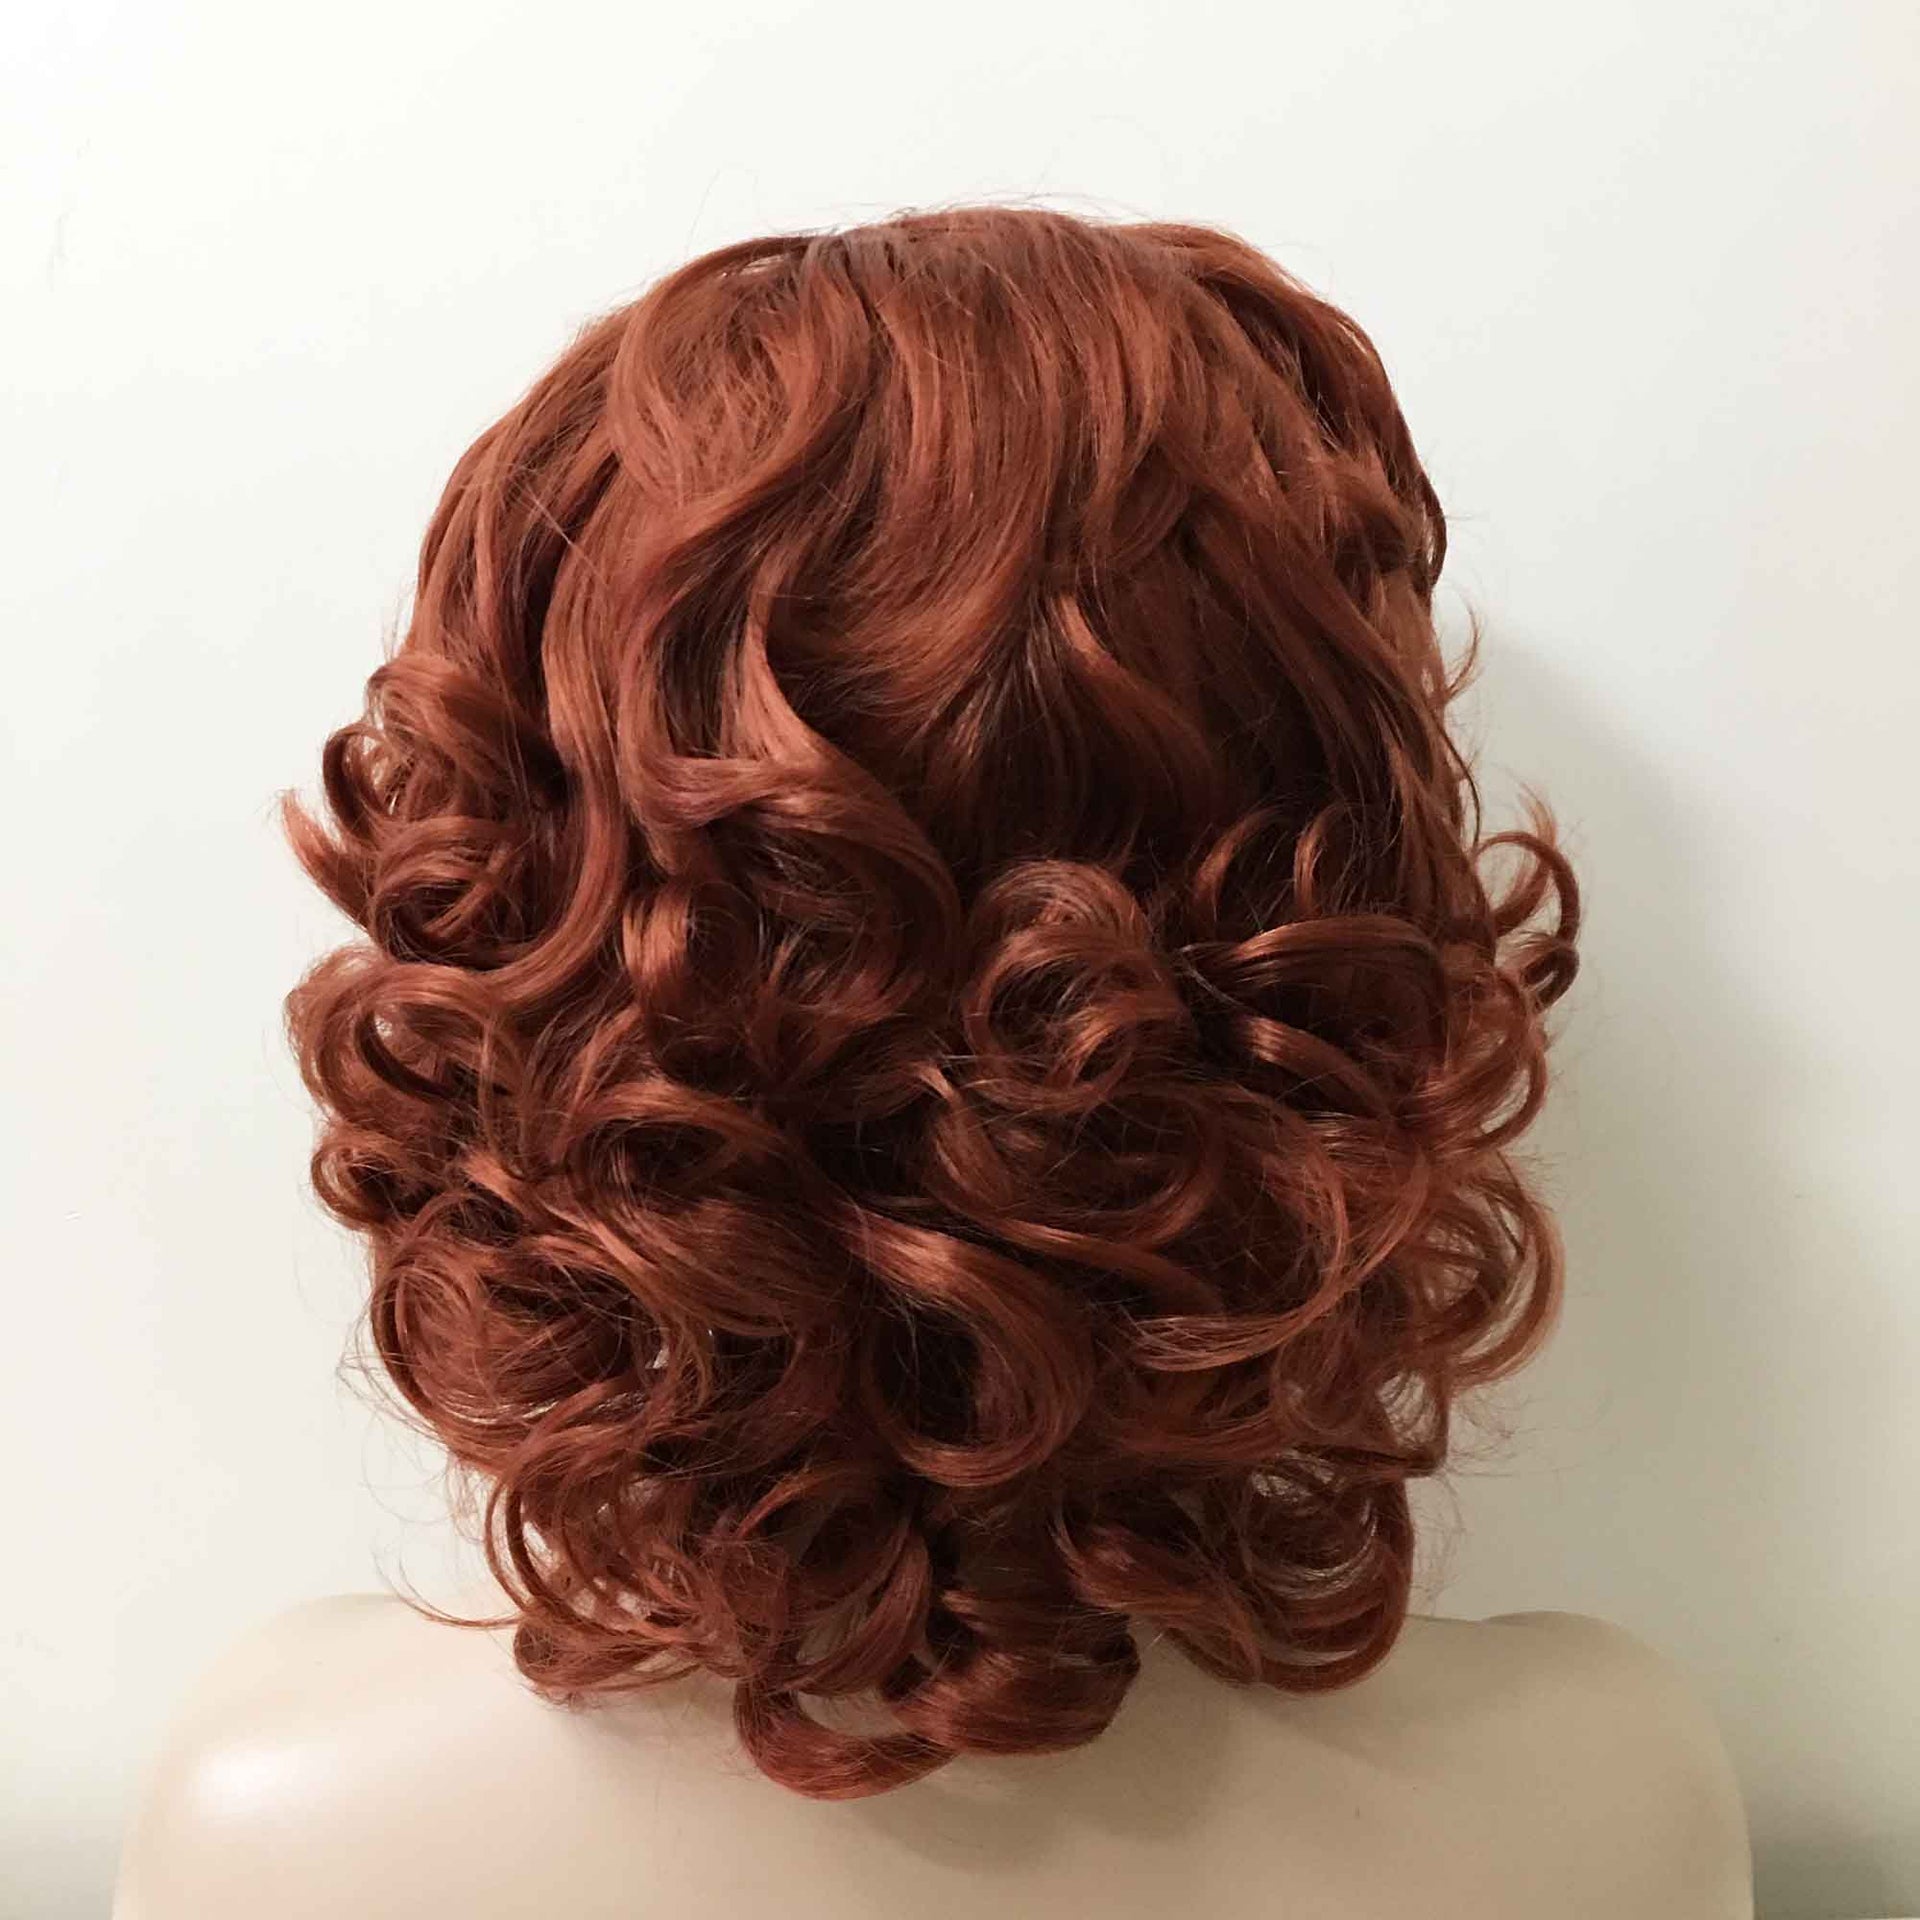 nevermindyrhead Women Dark Red Lace Front Short Curly Vintage Style Slicked Back Wig